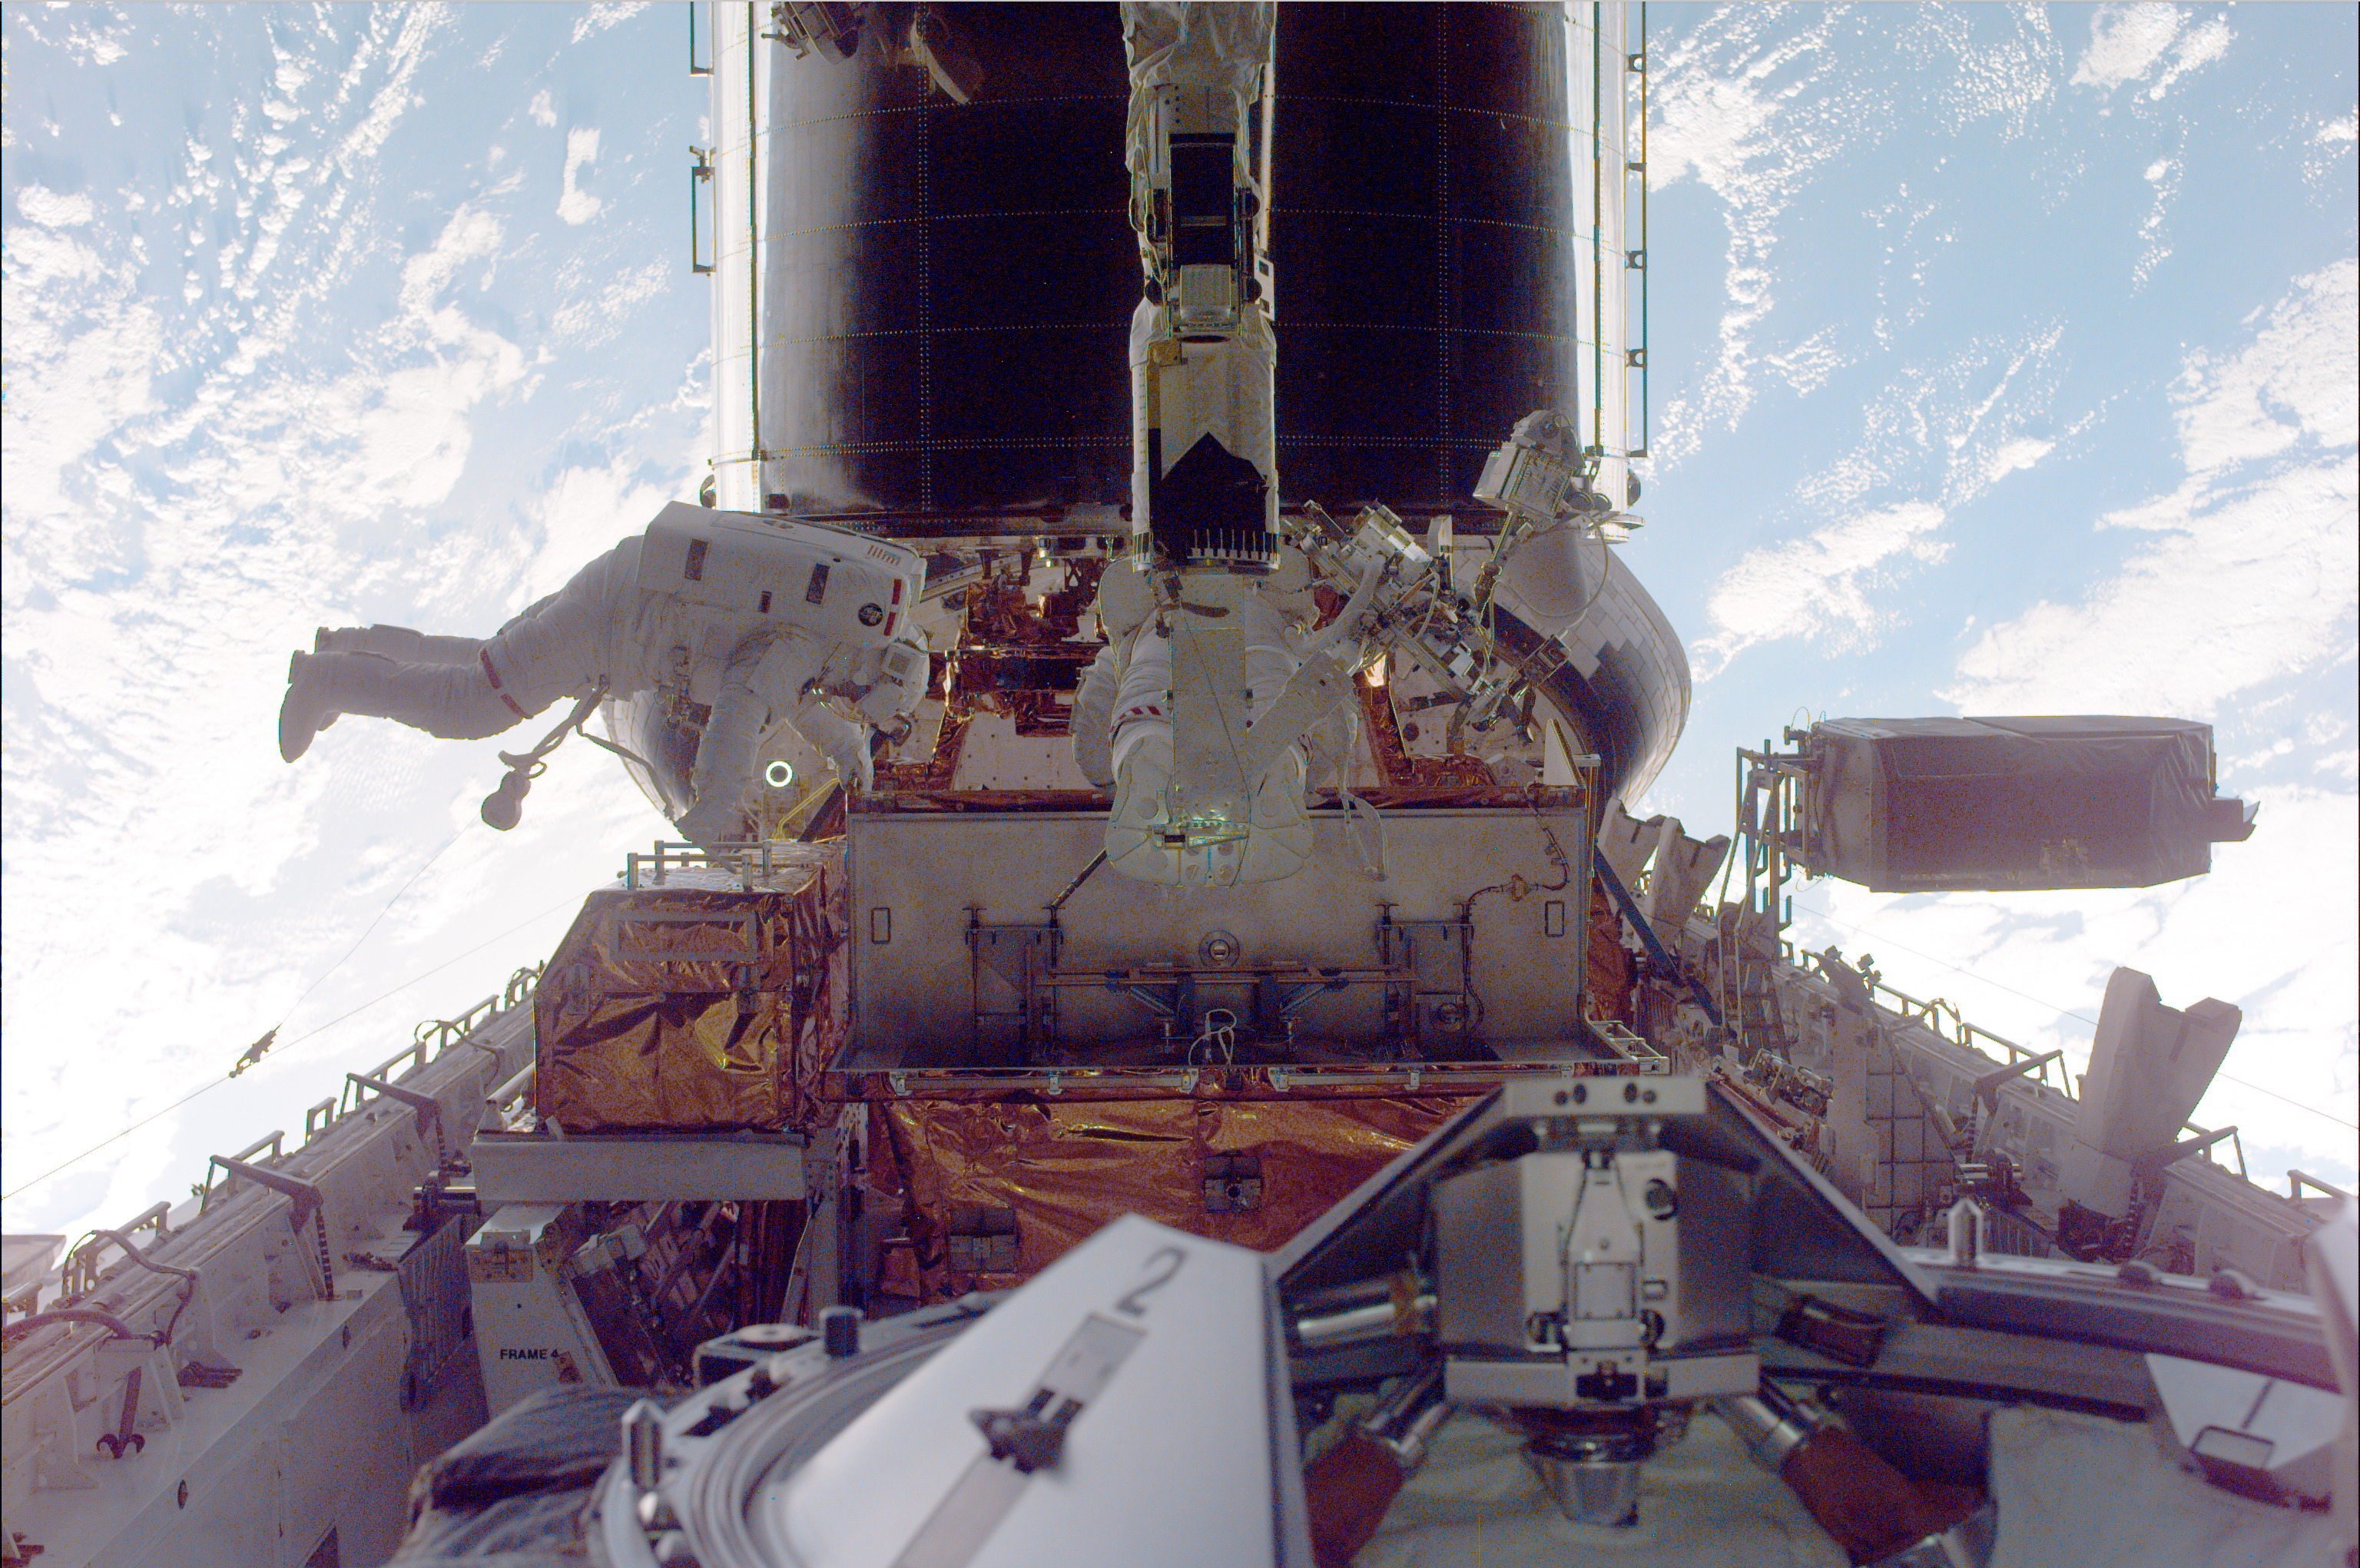 Earth fills the background behind Hubble in its position in the space shuttle's cargo bay. Two astronauts work in the cargo bay, one partially obscured by the shuttle's robotic arm.